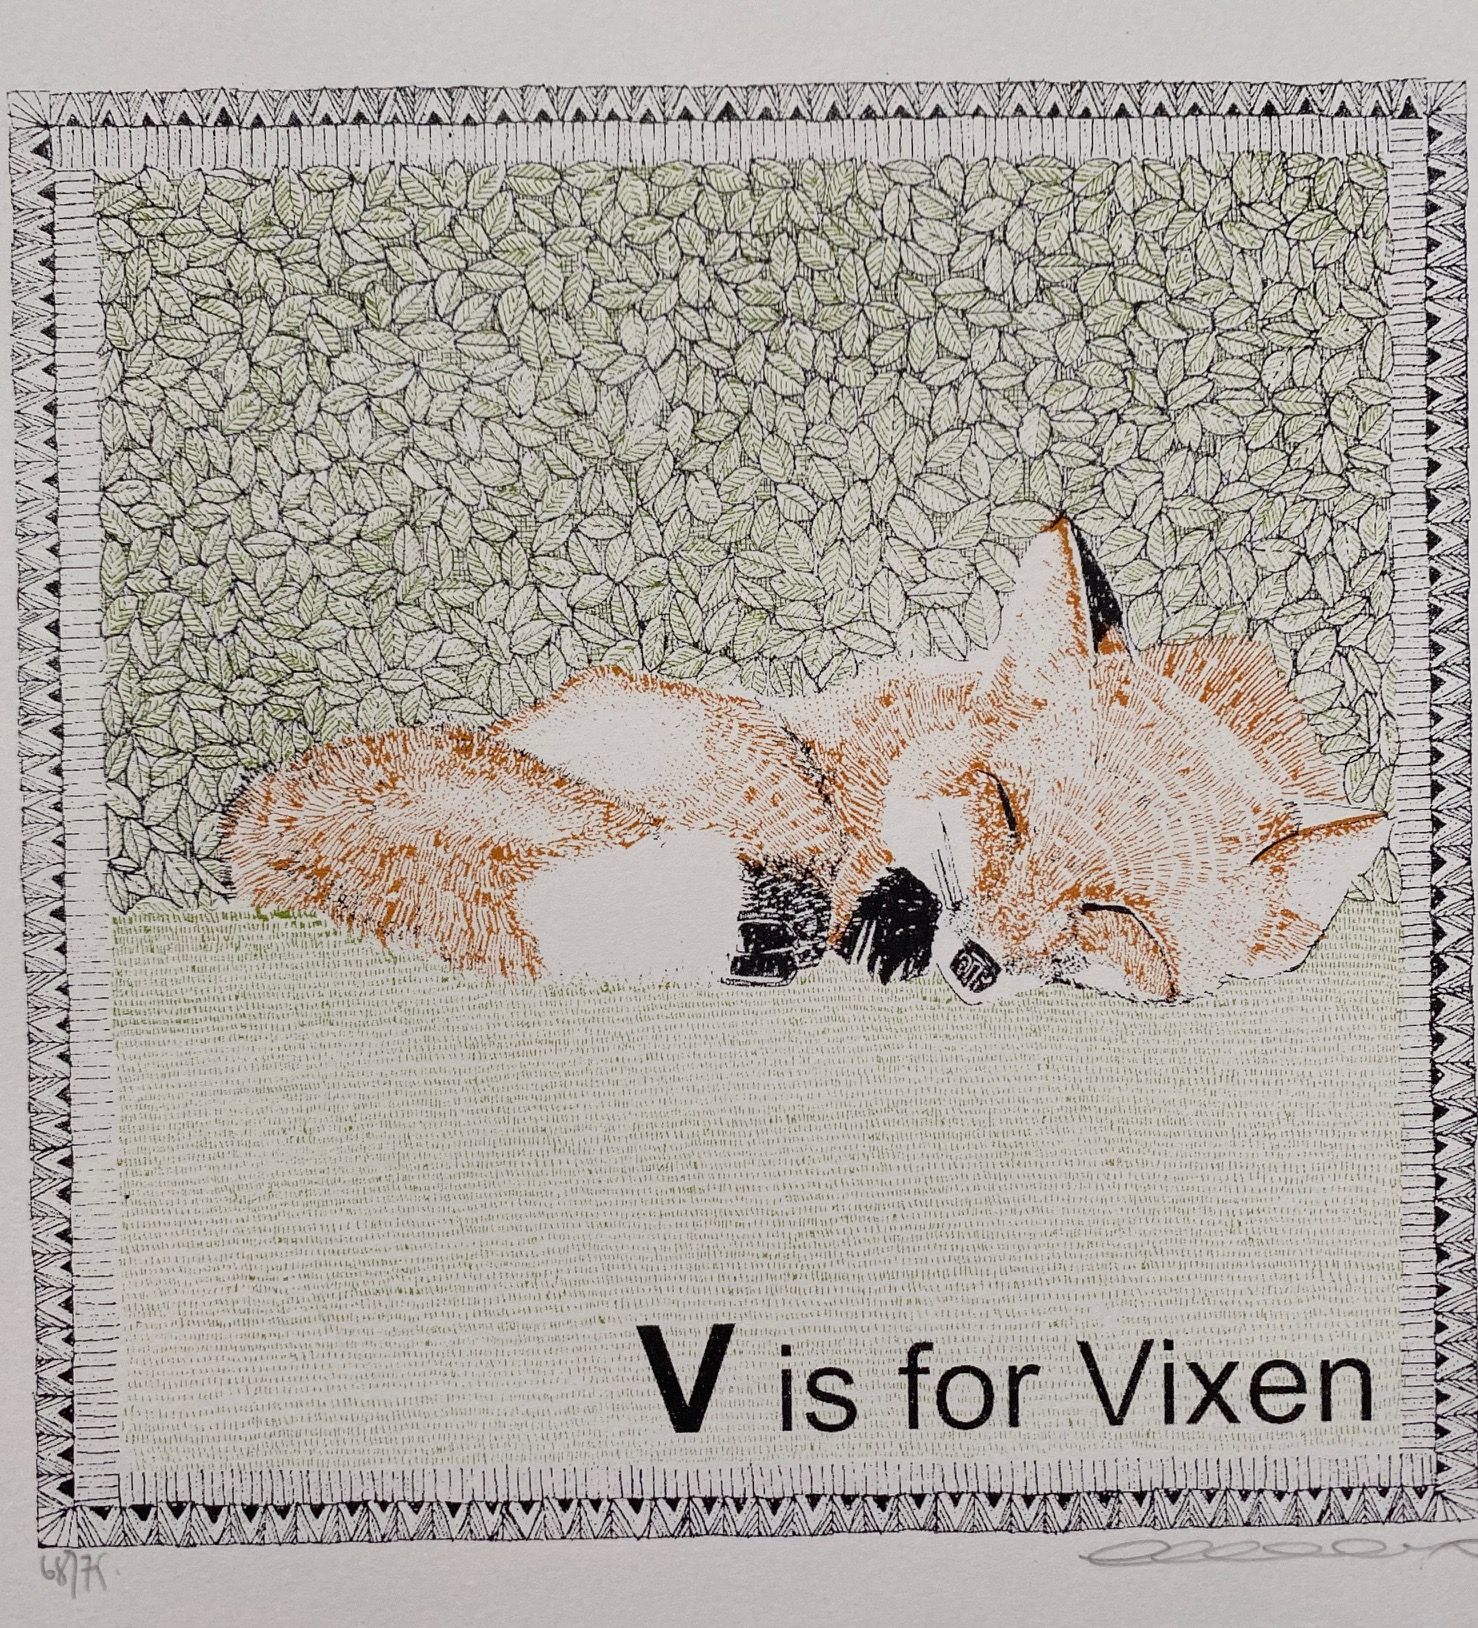 V is for Vixen (small) by Clare Halifax